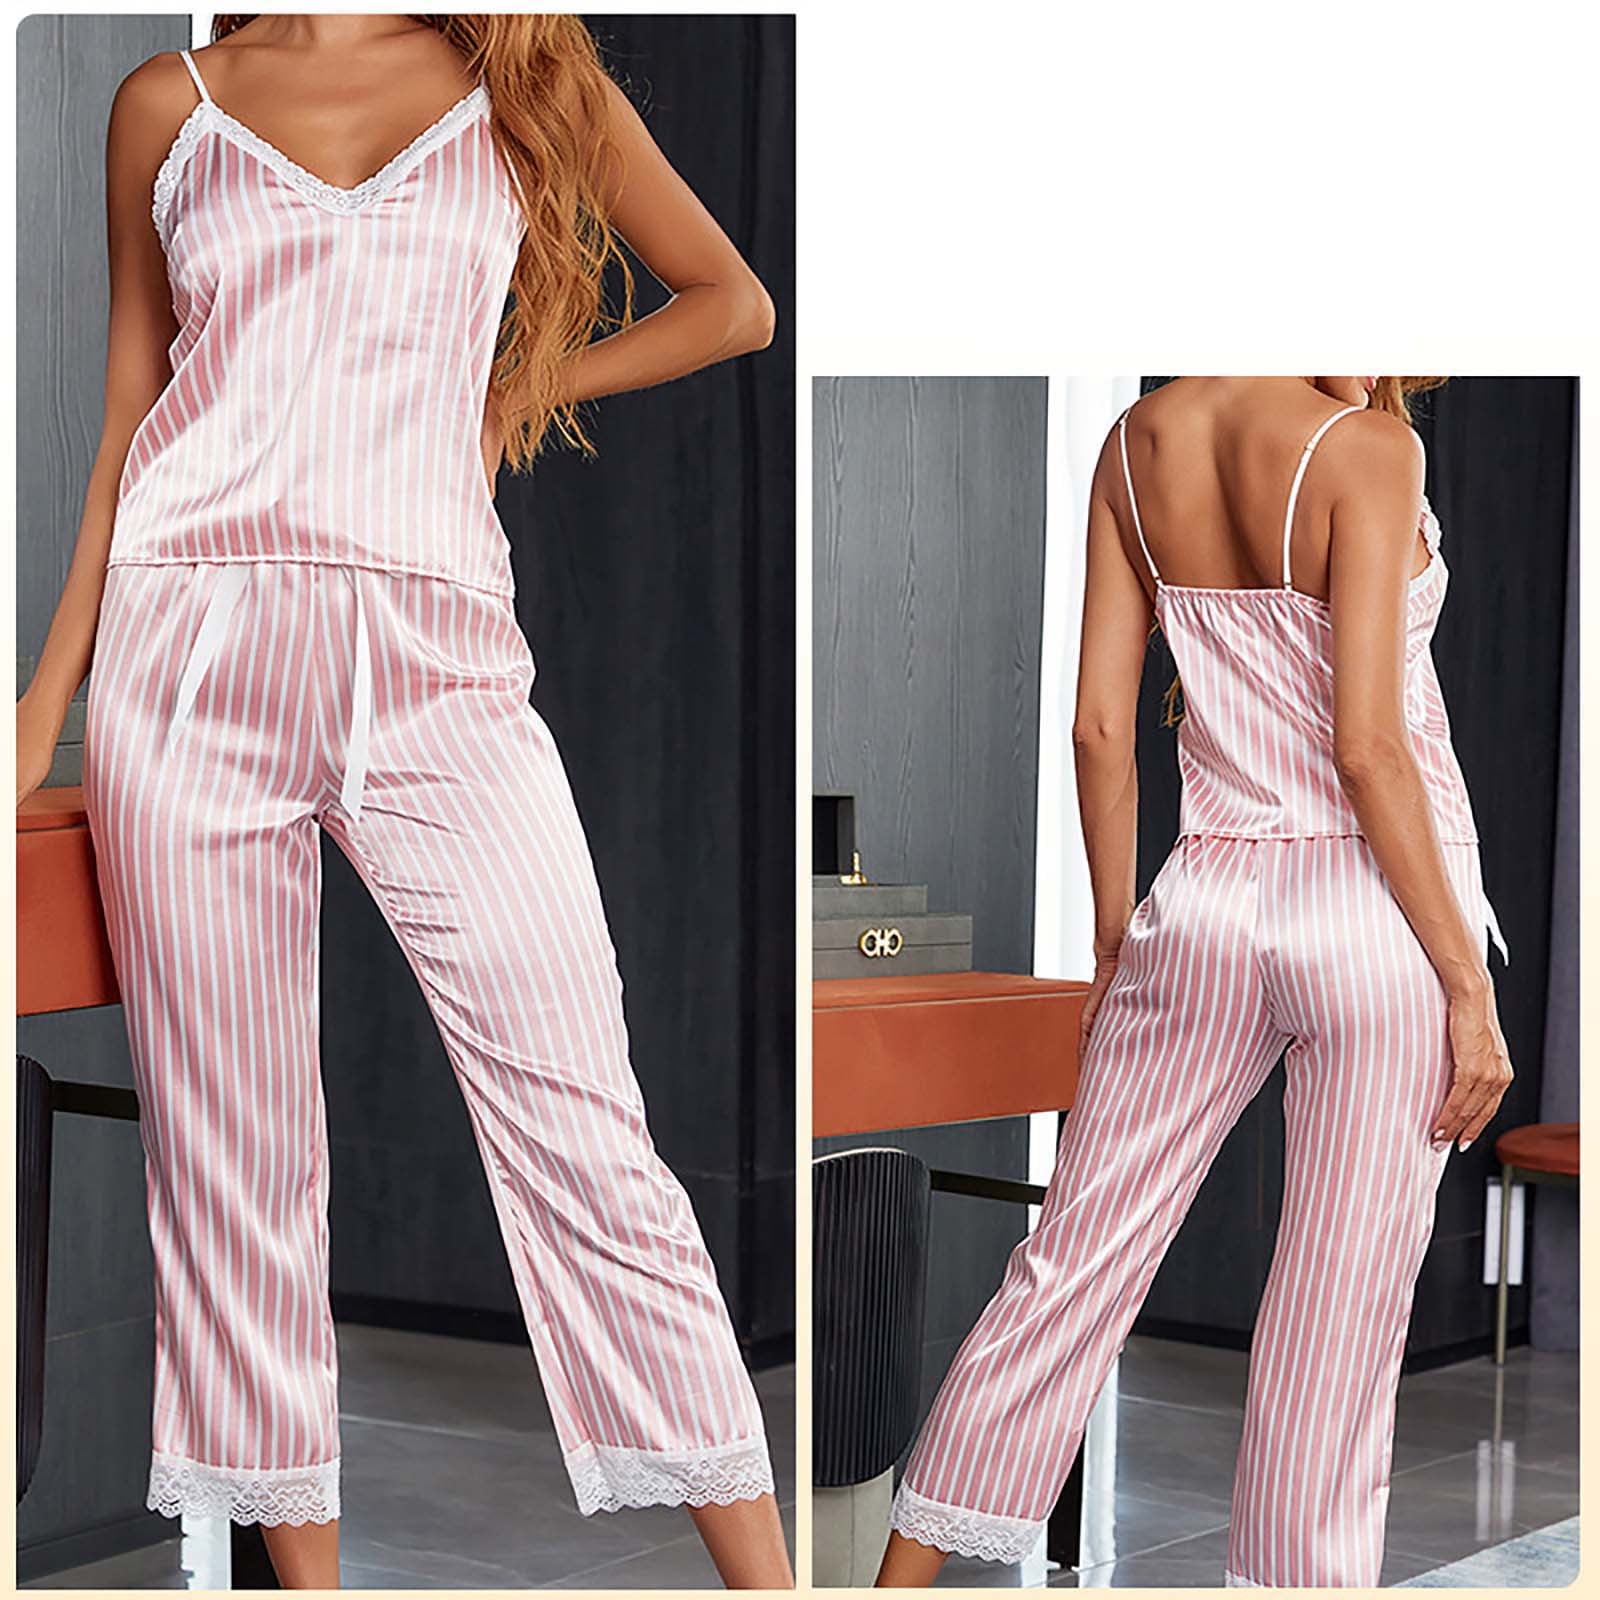 Whlbf Pyjama Set for Women Clearance Sexy Women Lingerie Camis